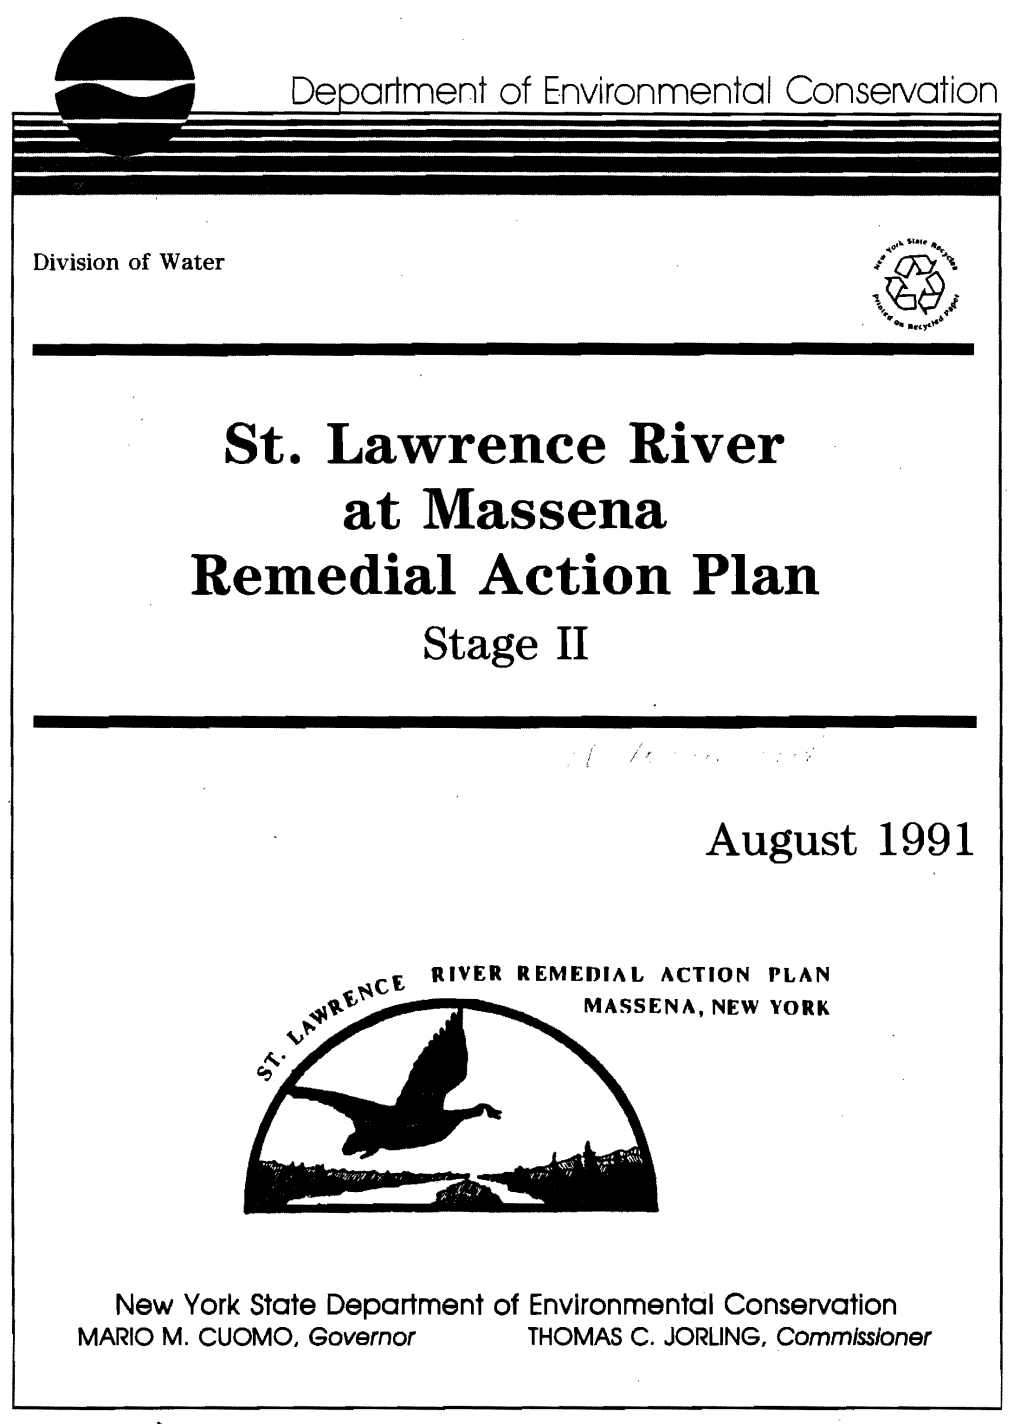 St. Lawrence River at Massena Remedial Action Plan Stage II